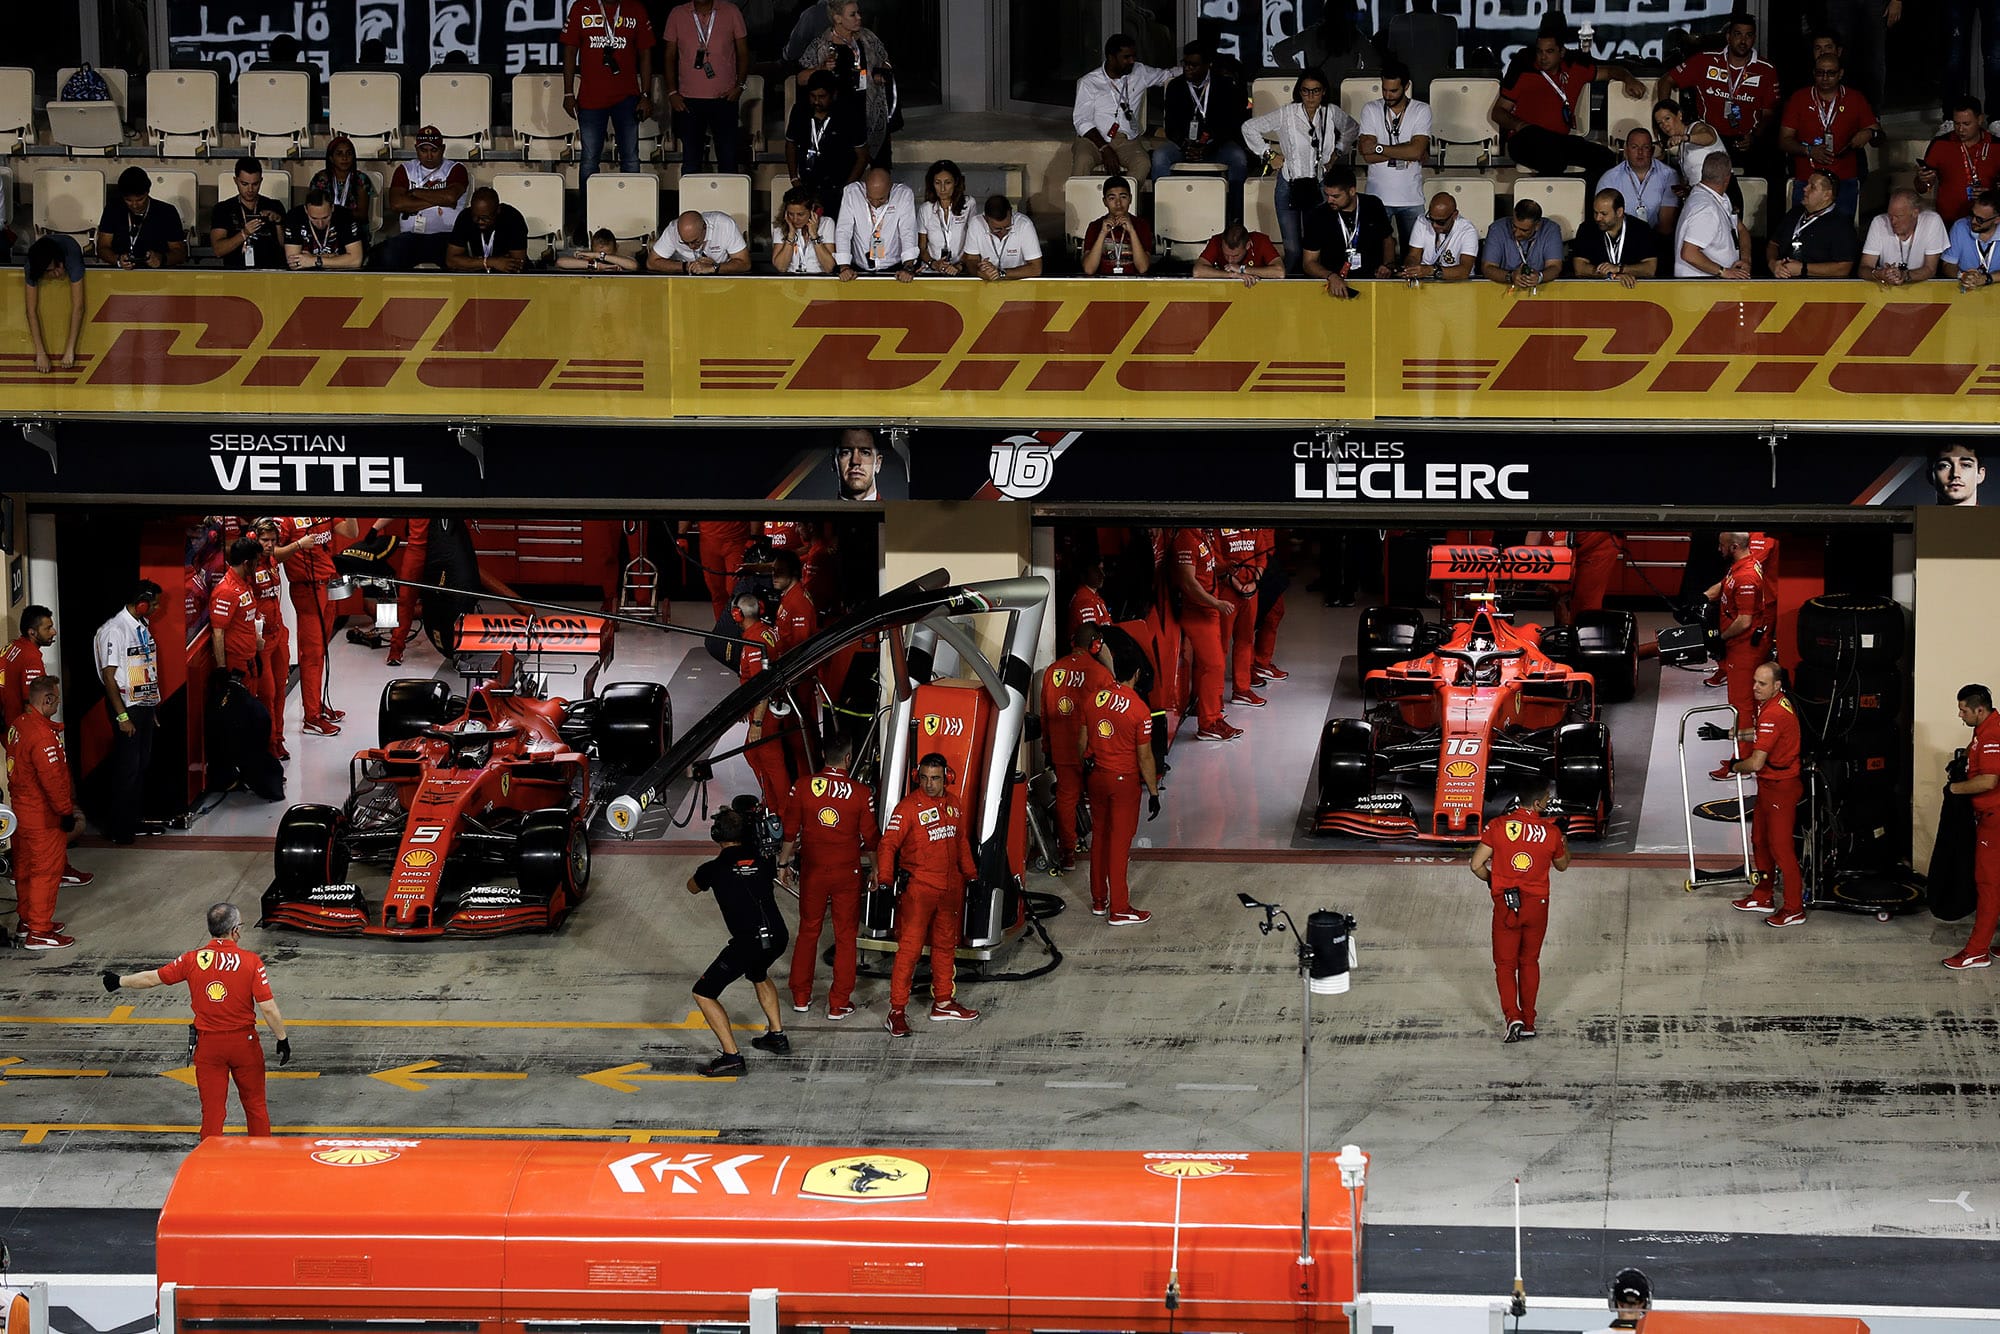 Ferraris head out for another qualifying run at the 2019 Abu Dhabi Grand Prix